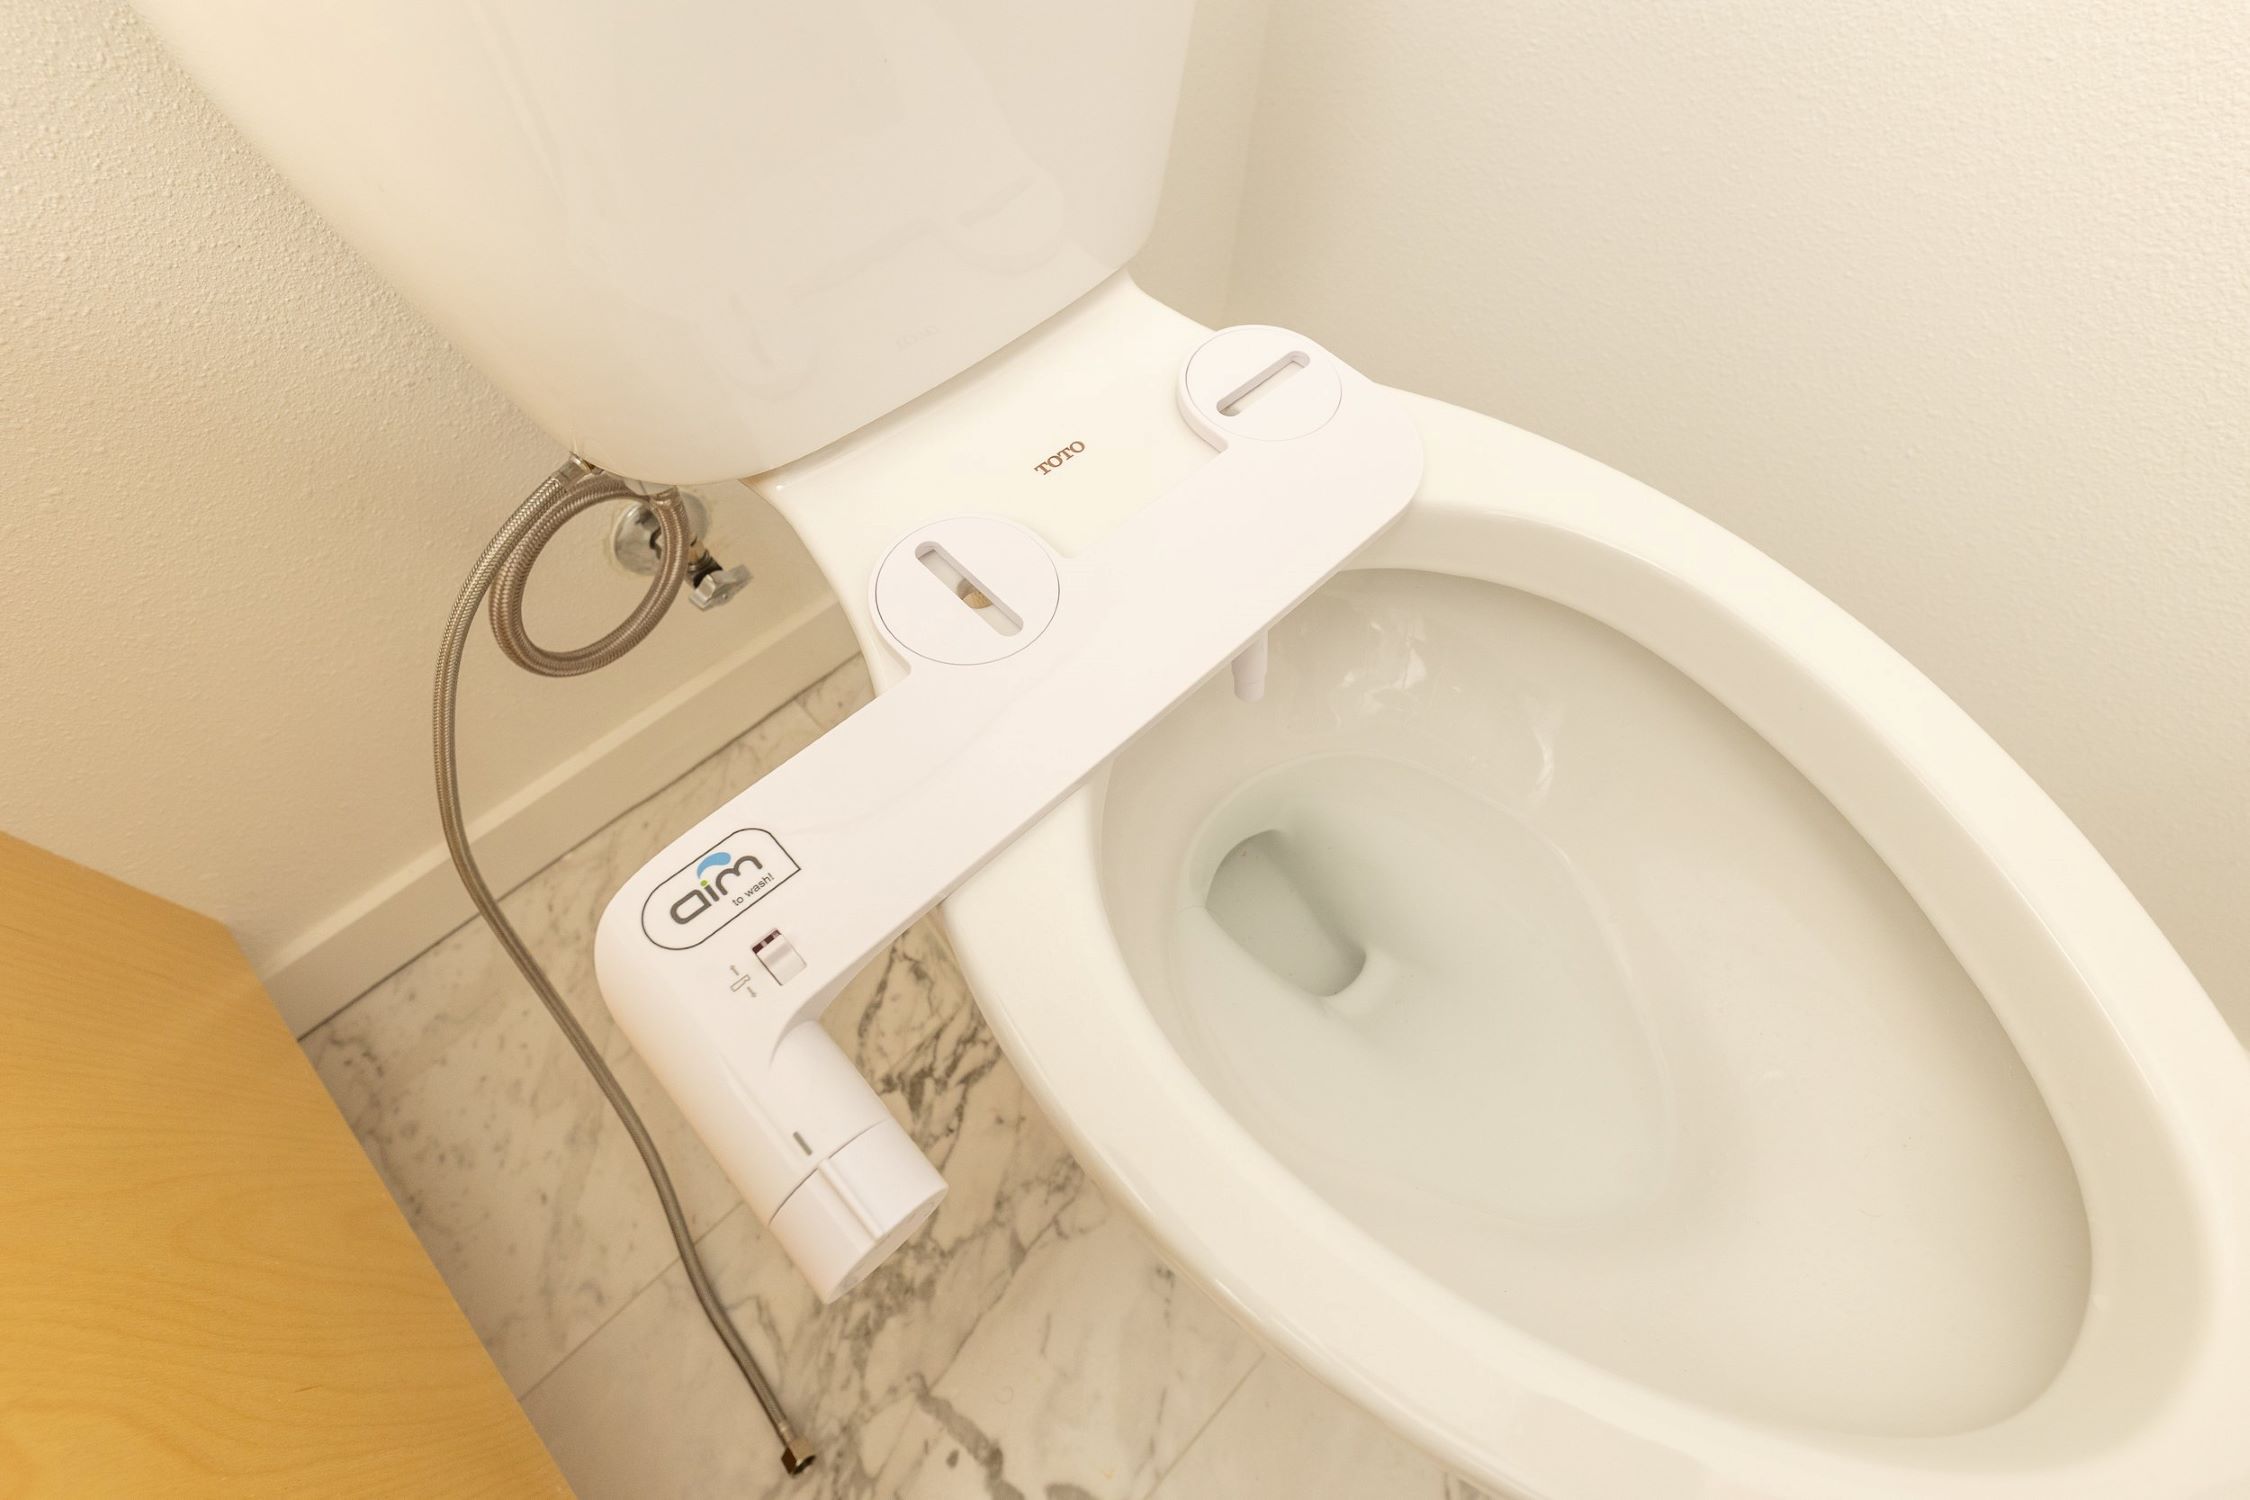 How To Use A Bidet For Men